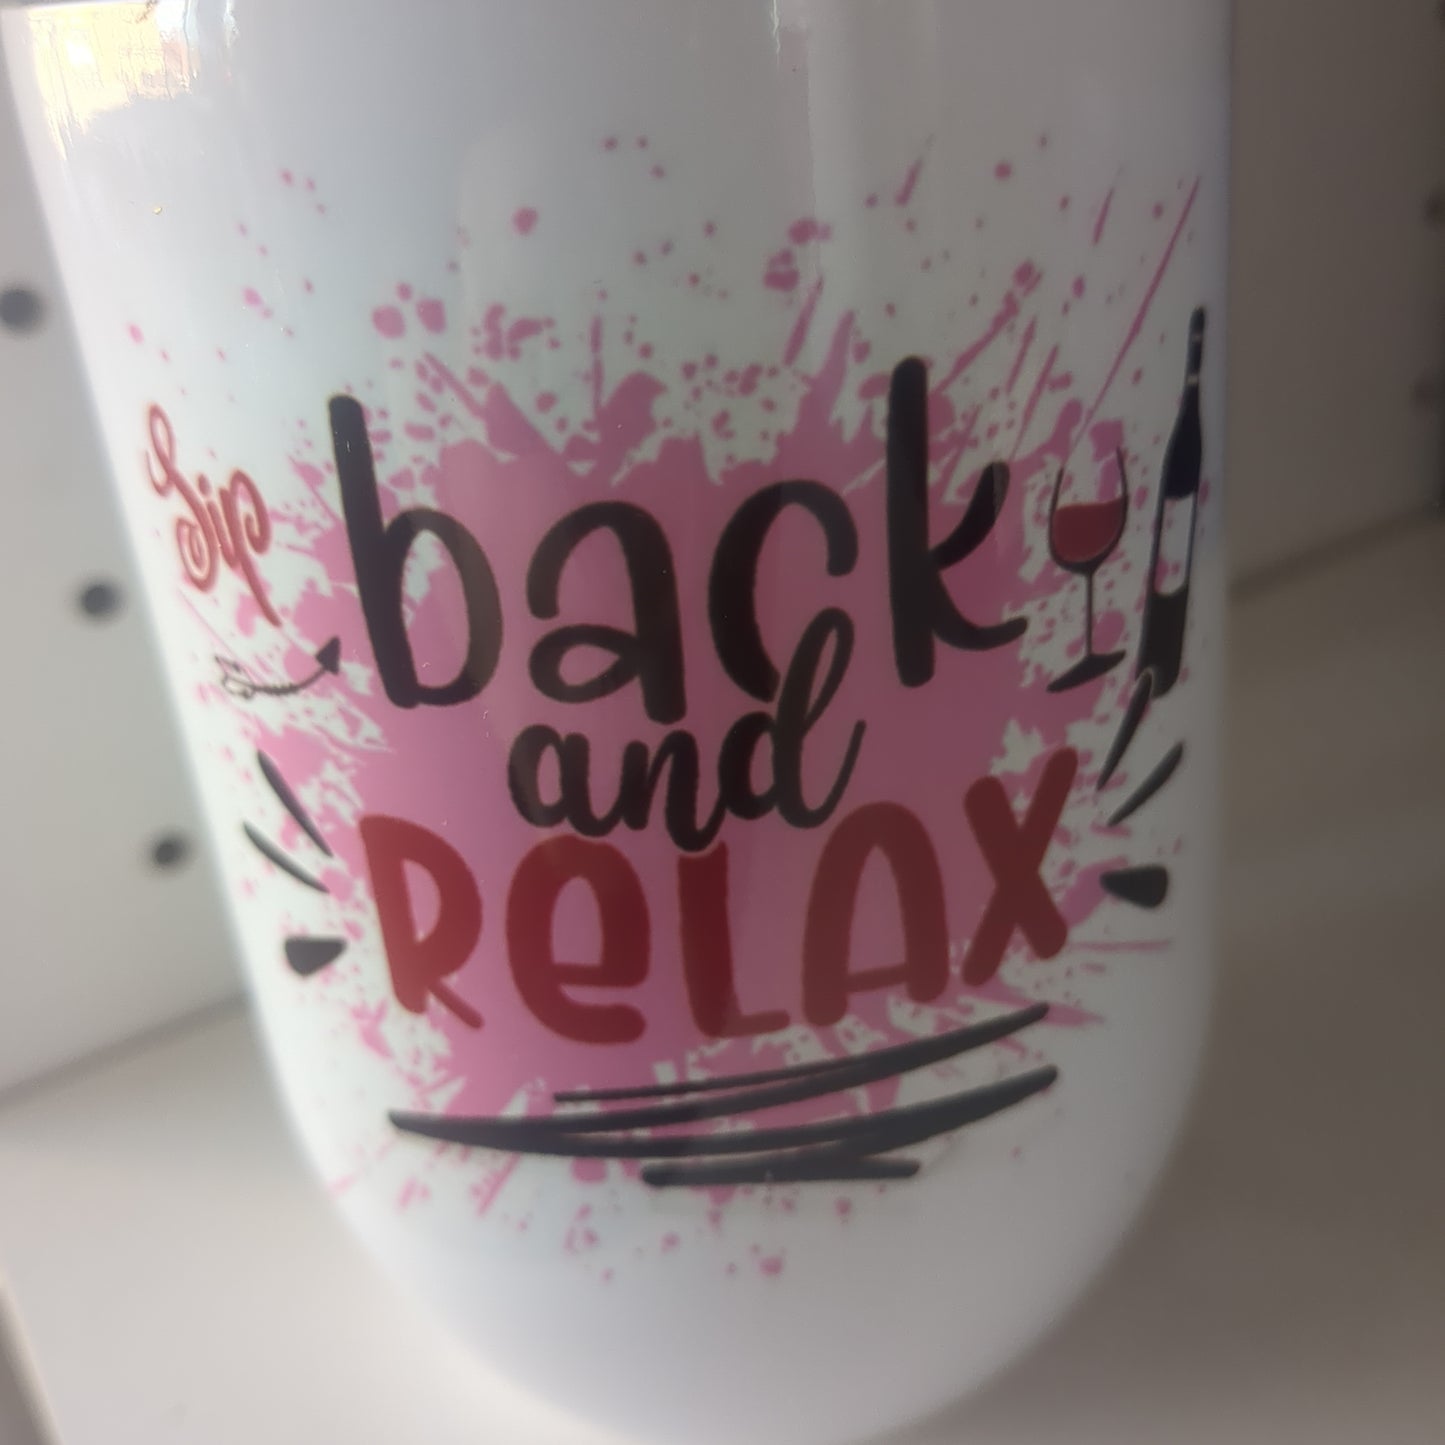 12 Oz Stainless Steel Wine Glass. It Says Sit Back And Relax